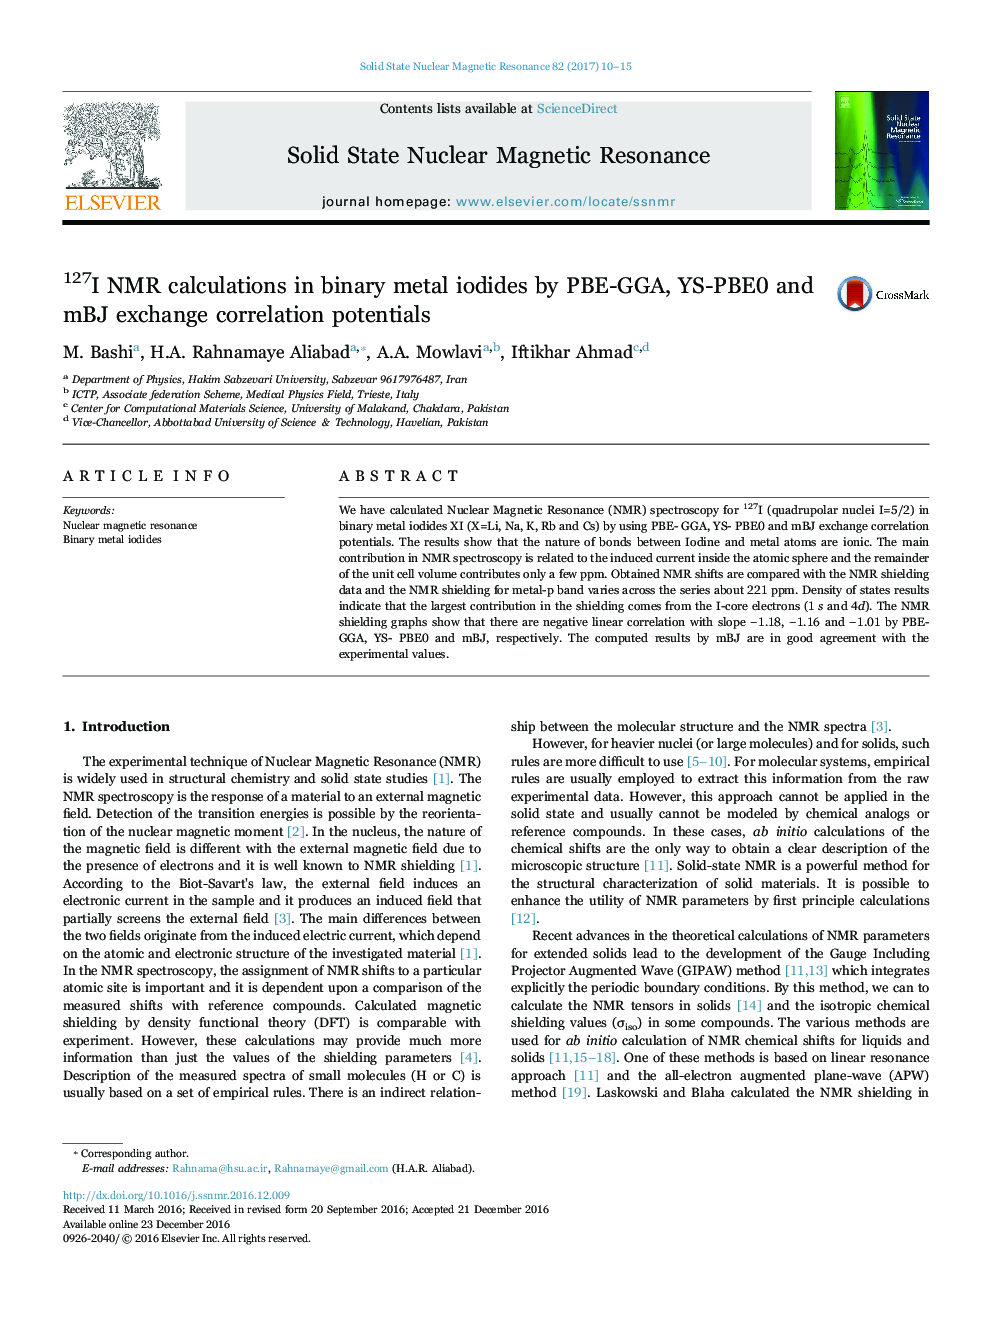 127I NMR calculations in binary metal iodides by PBE-GGA, YS-PBE0 and mBJ exchange correlation potentials